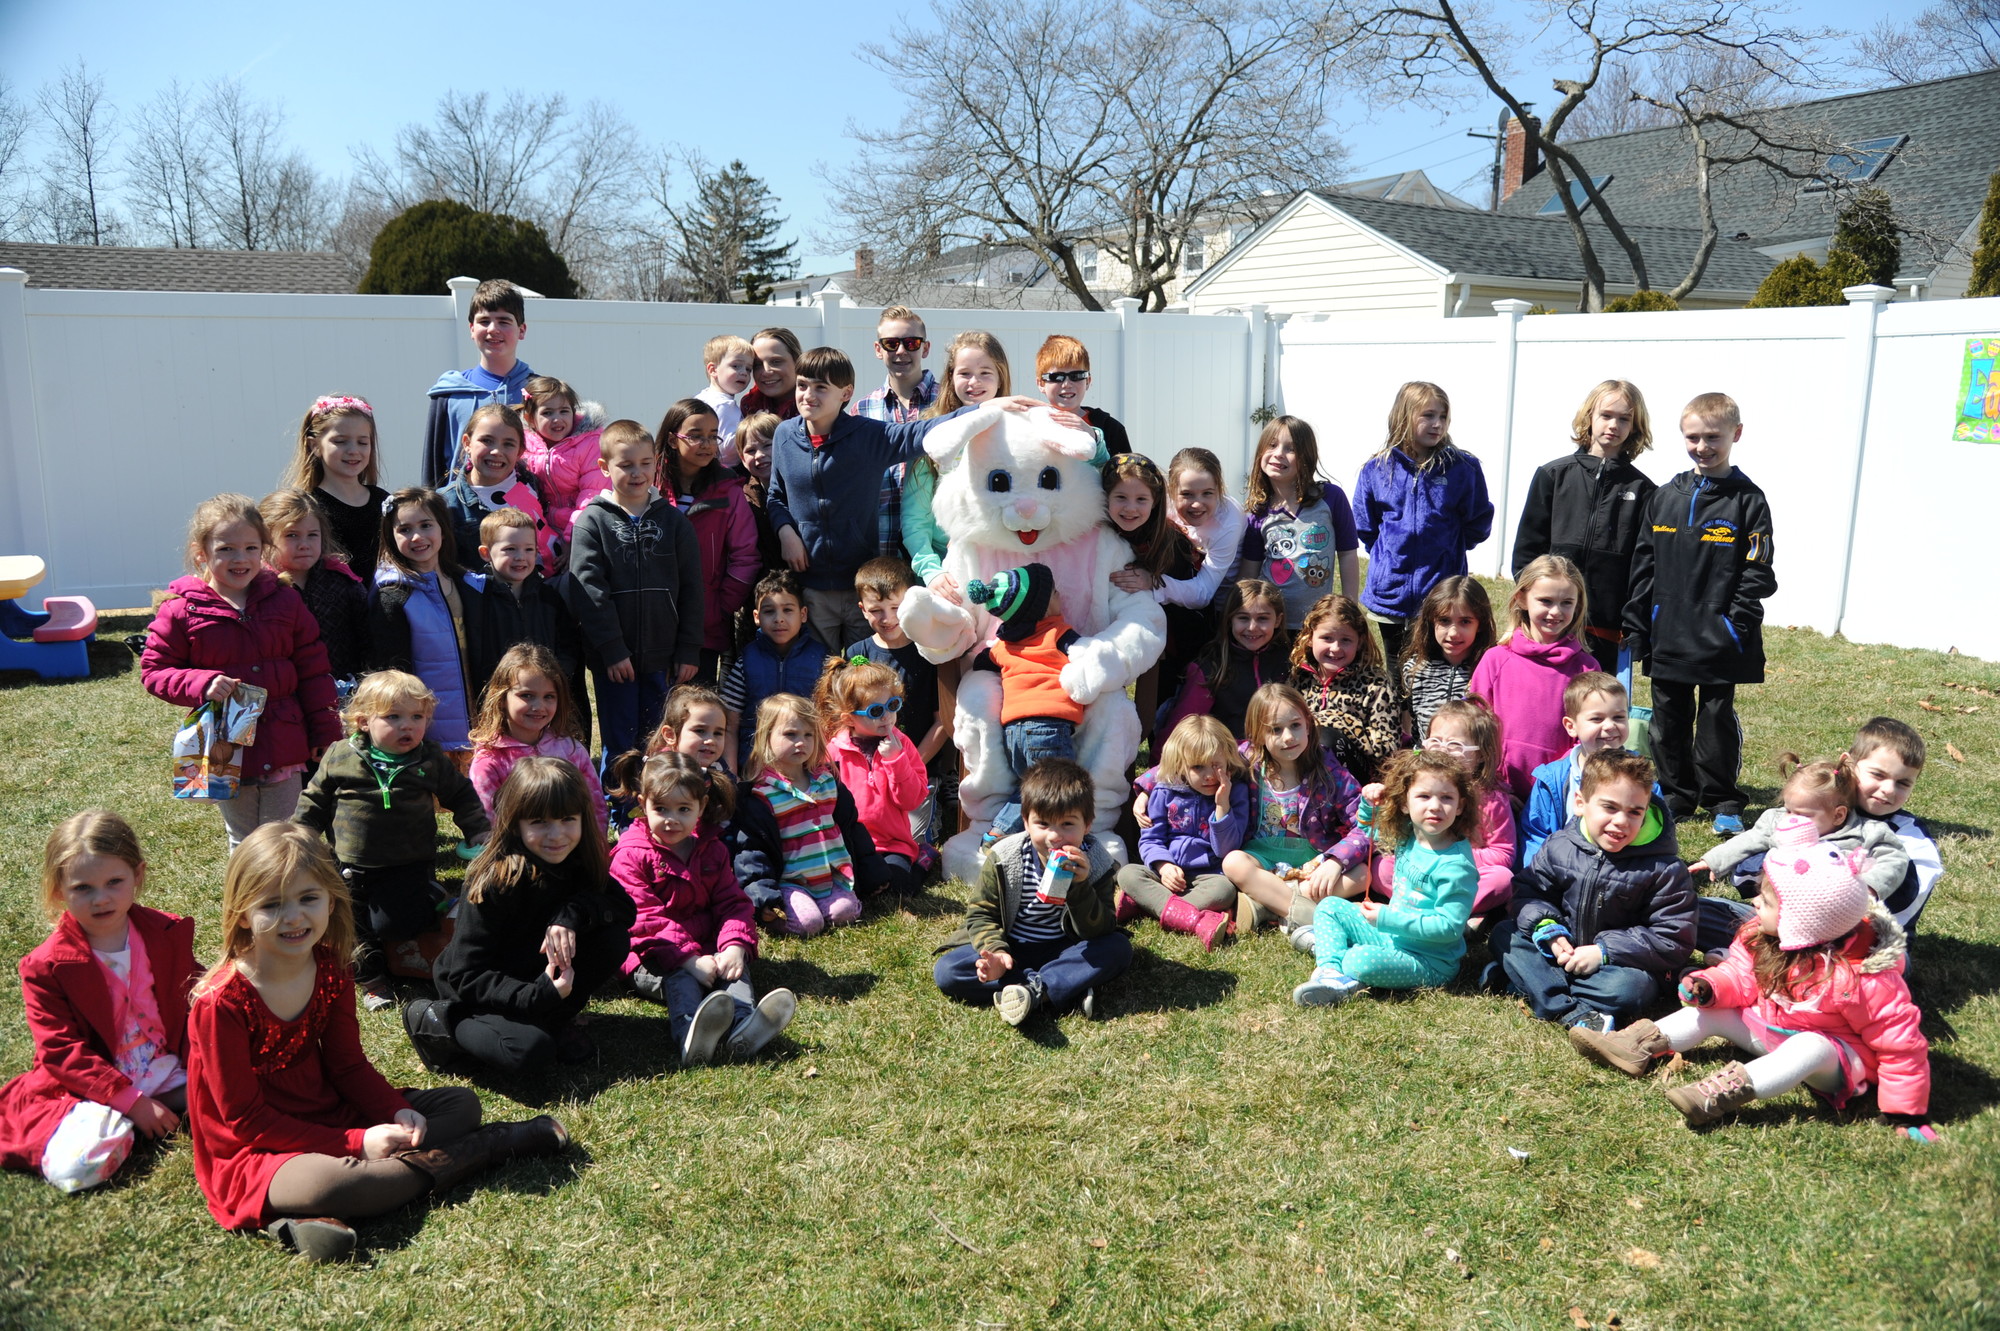 It was a packed backyard for the 18thh annual egg hunt.